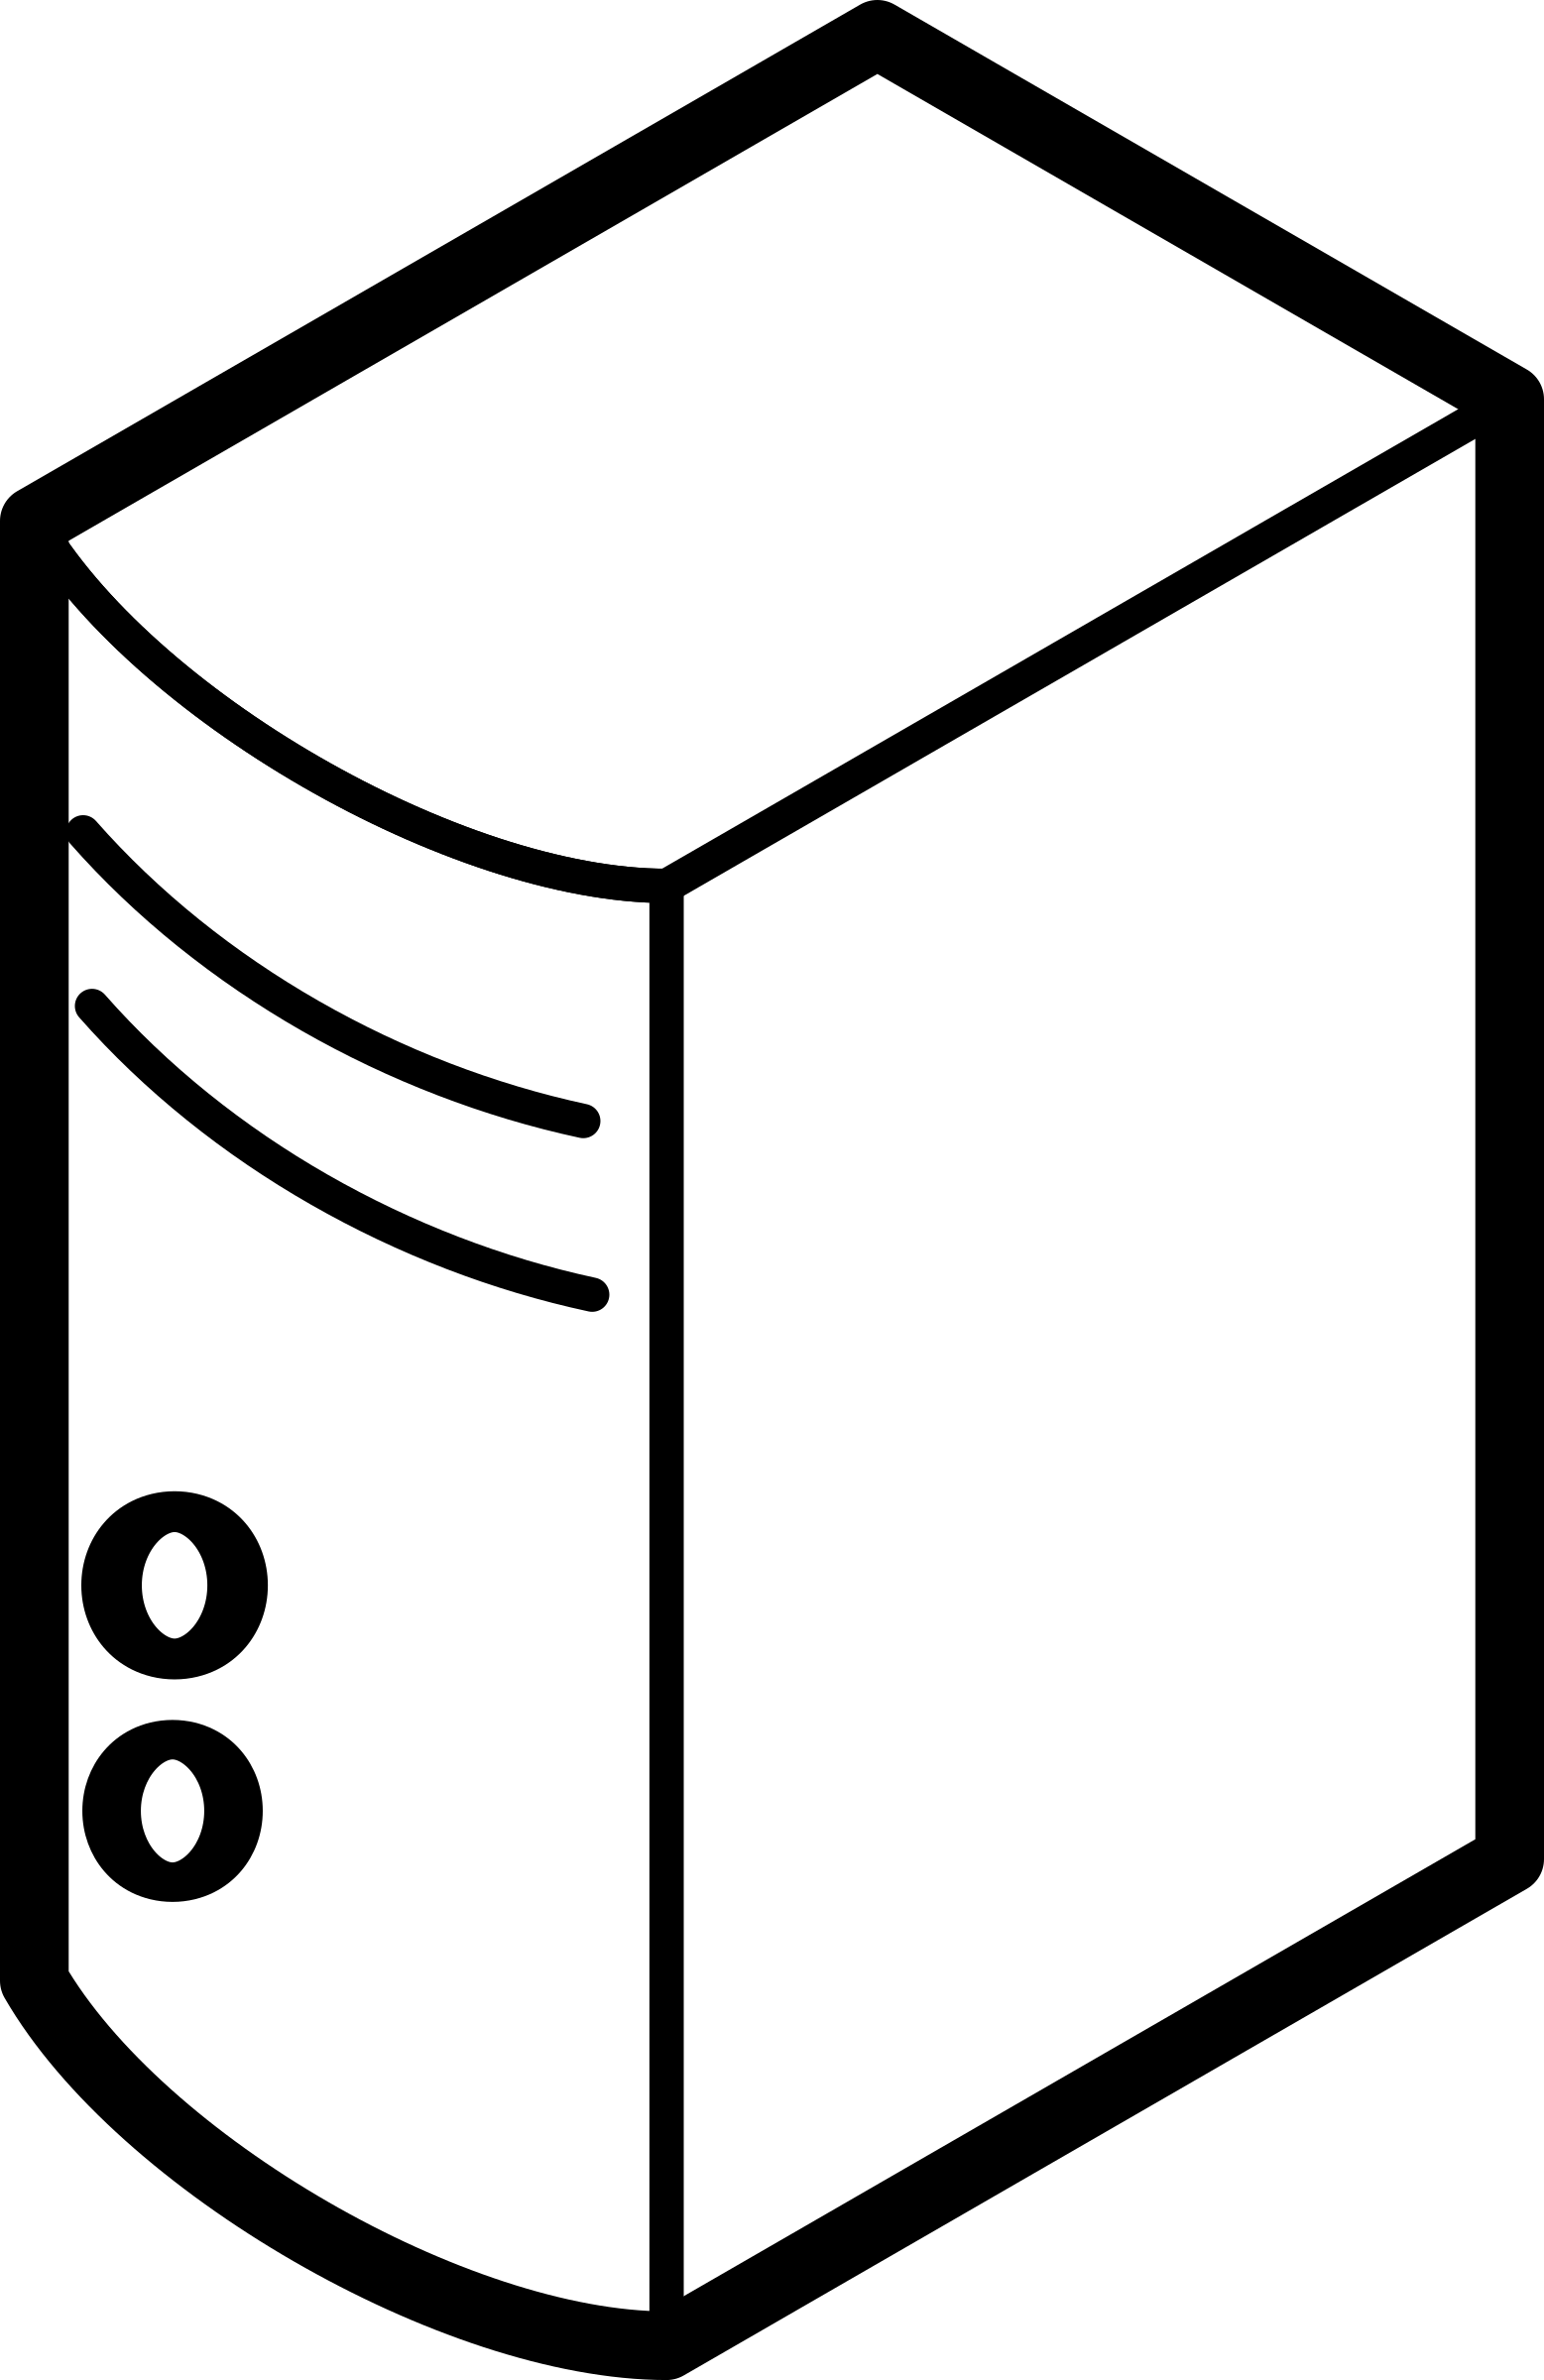 Computer Cpu Png Black And White - Big Image (Png), Transparent background PNG HD thumbnail